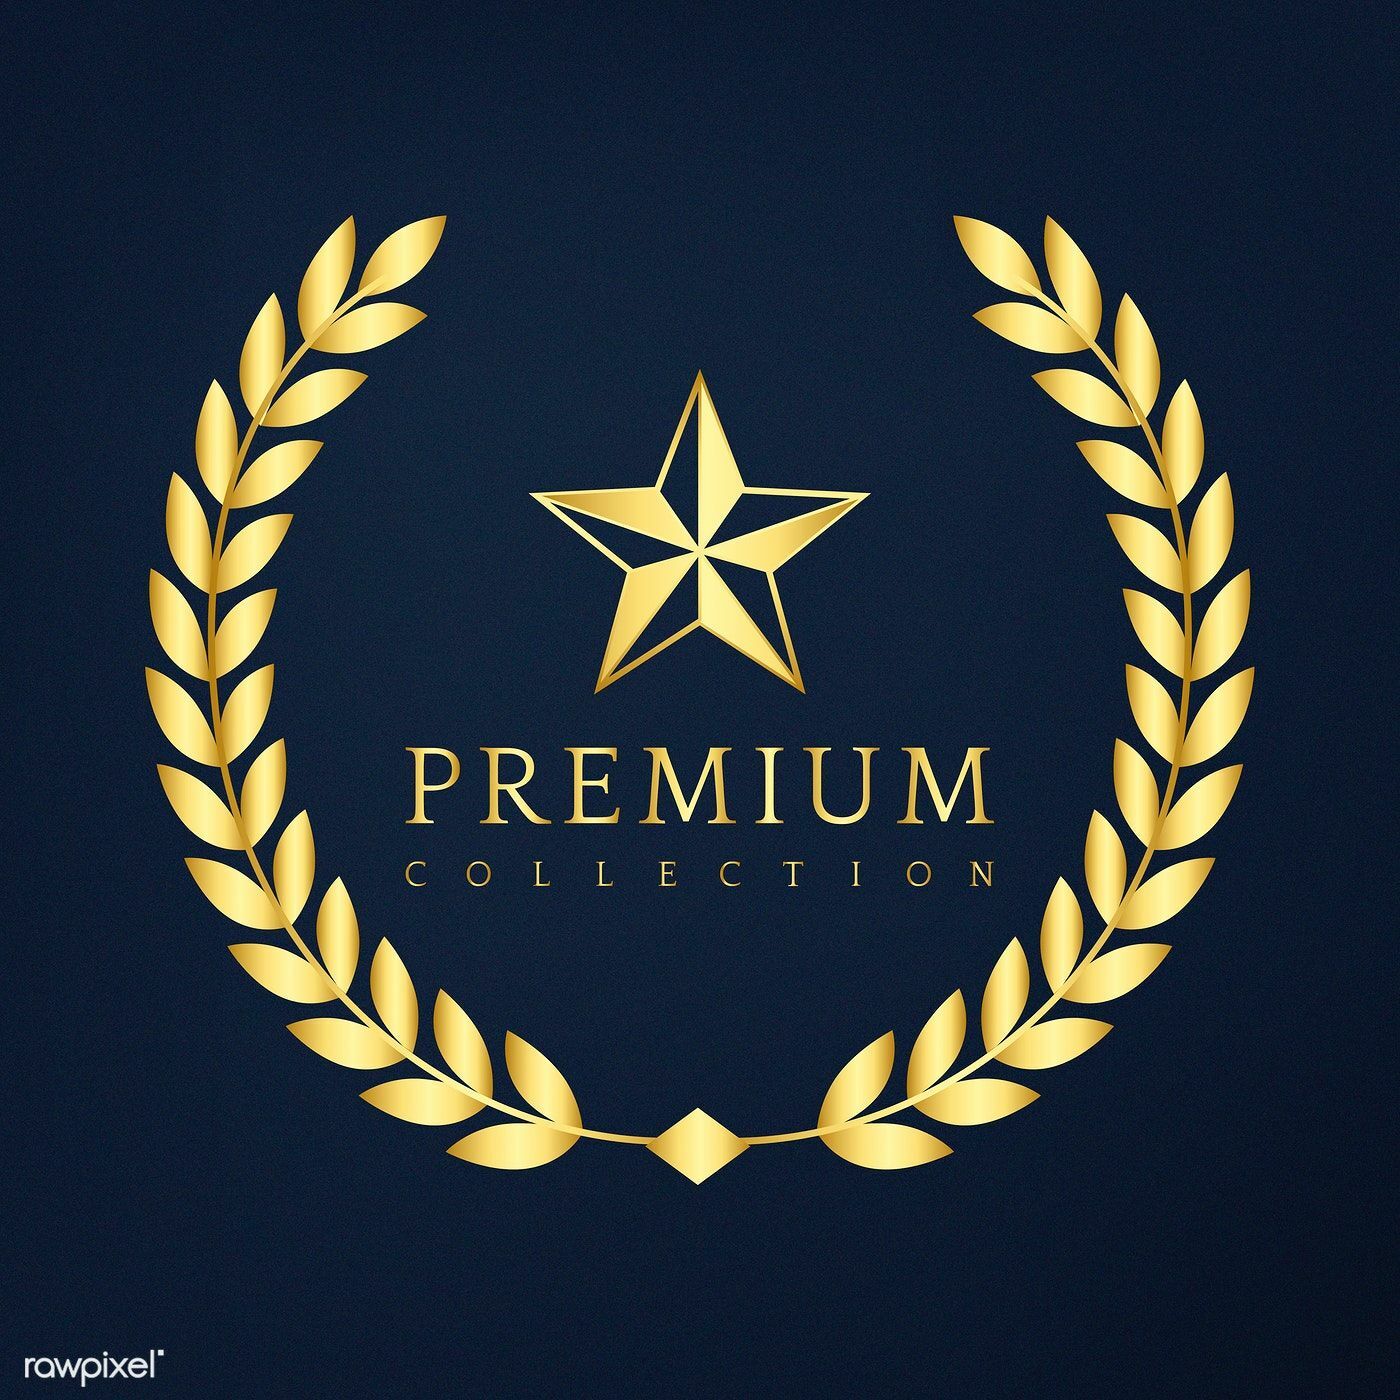 Premium Club For Members Mfc Share 🌴